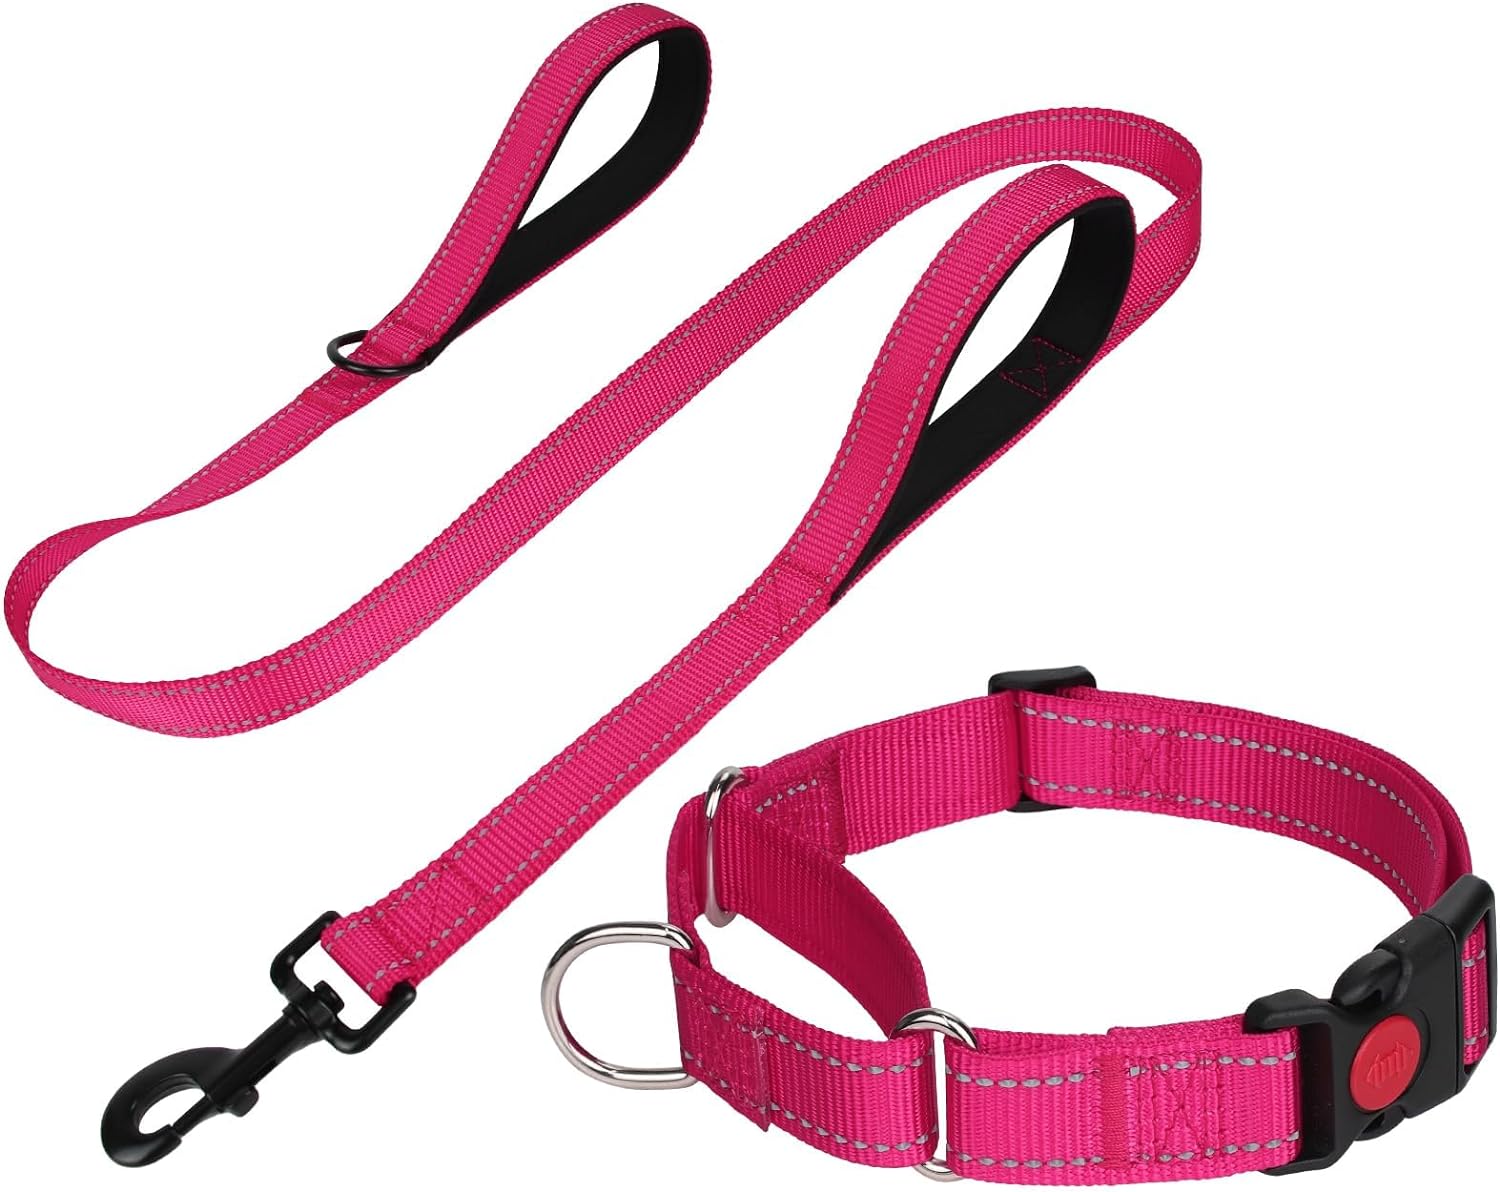 FunTags Reflective Martingale Collar for Dogs, Quick Release Buckle, 5FT Double Handle Dog Leash Padded, Dog Collar and Leash Set, Adjustable for Medium Dogs (Hotpink, M)